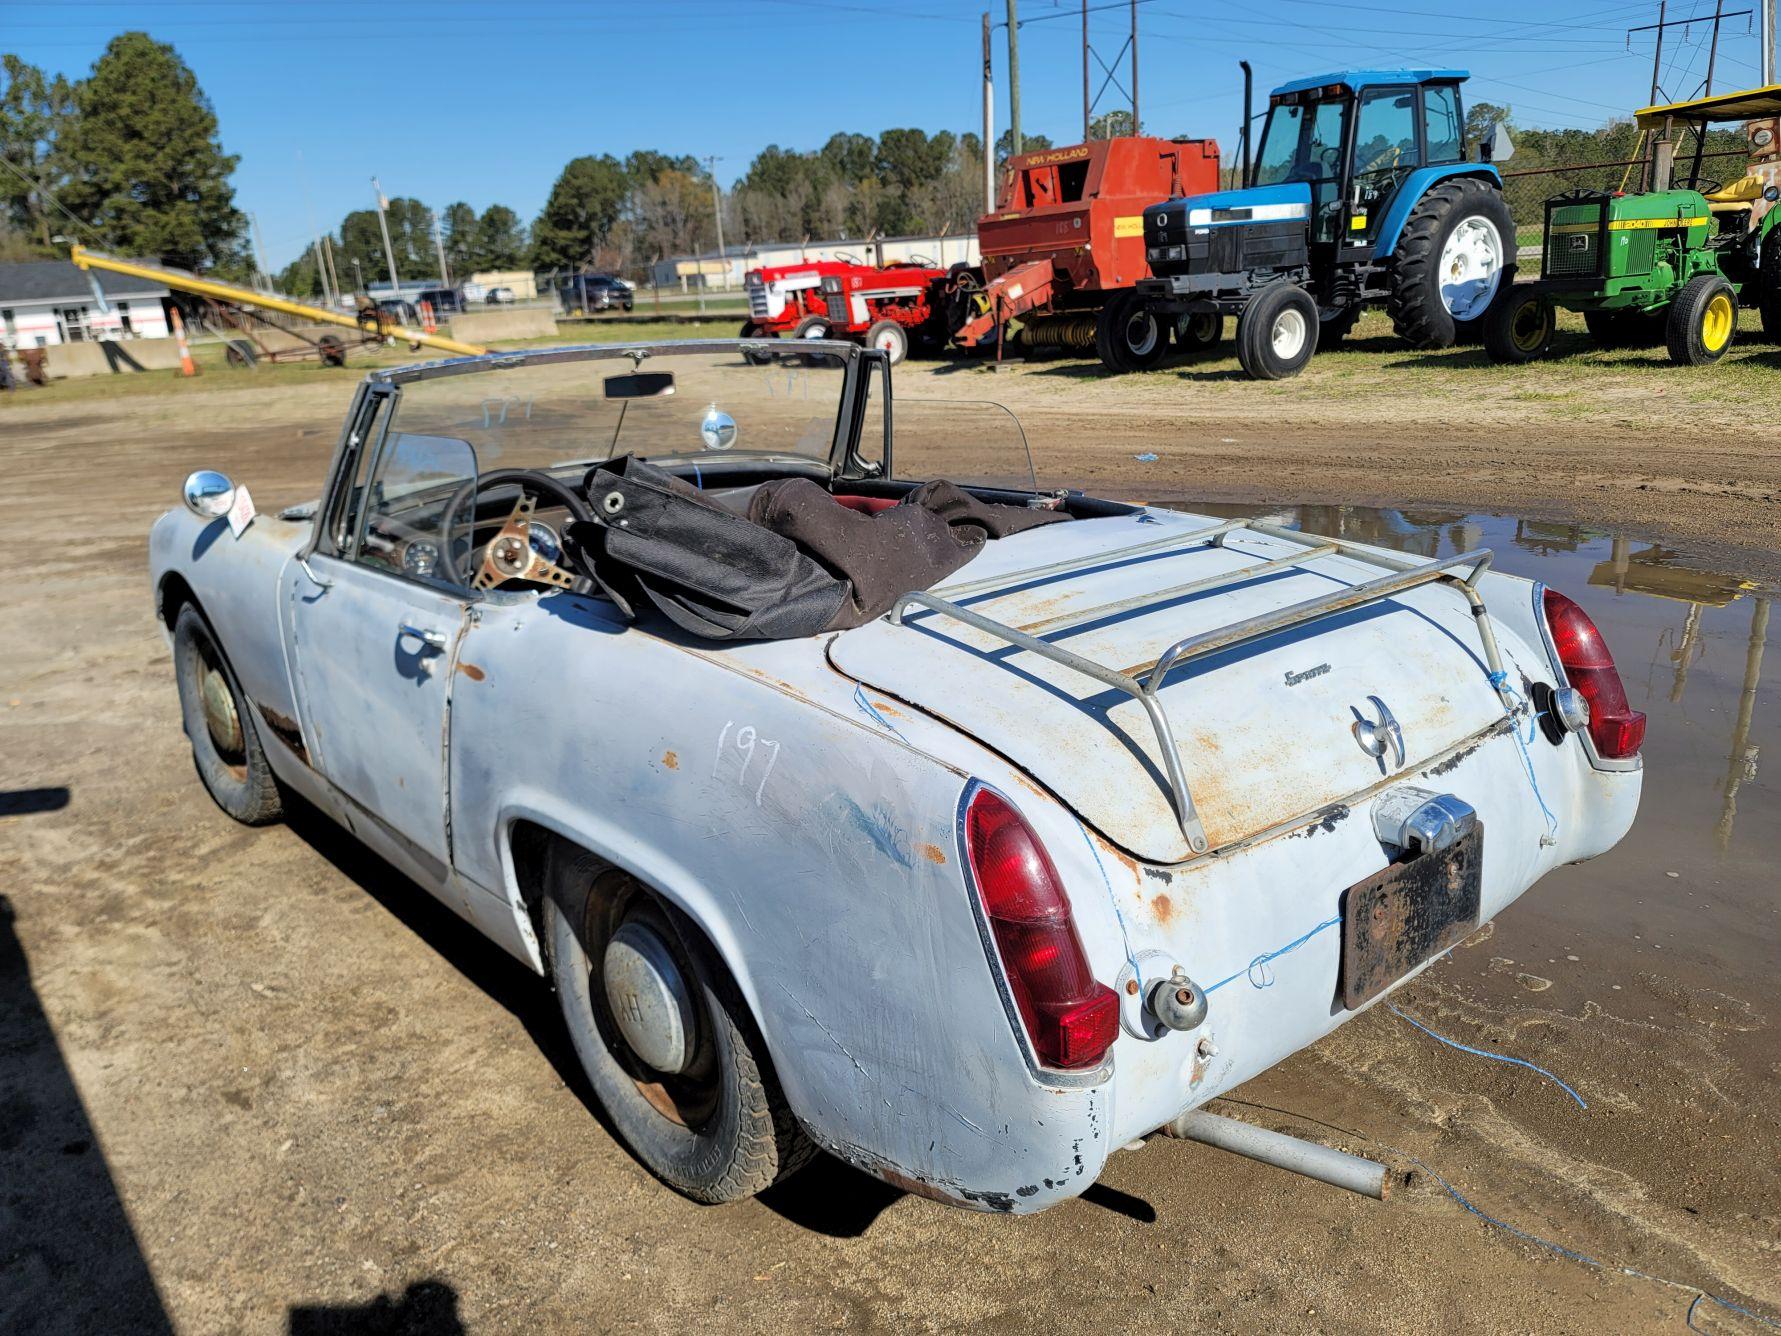 1967 AUSTIN HEALY SPRITE Antique 2 seater Convertible Sports Car, 4cylinder